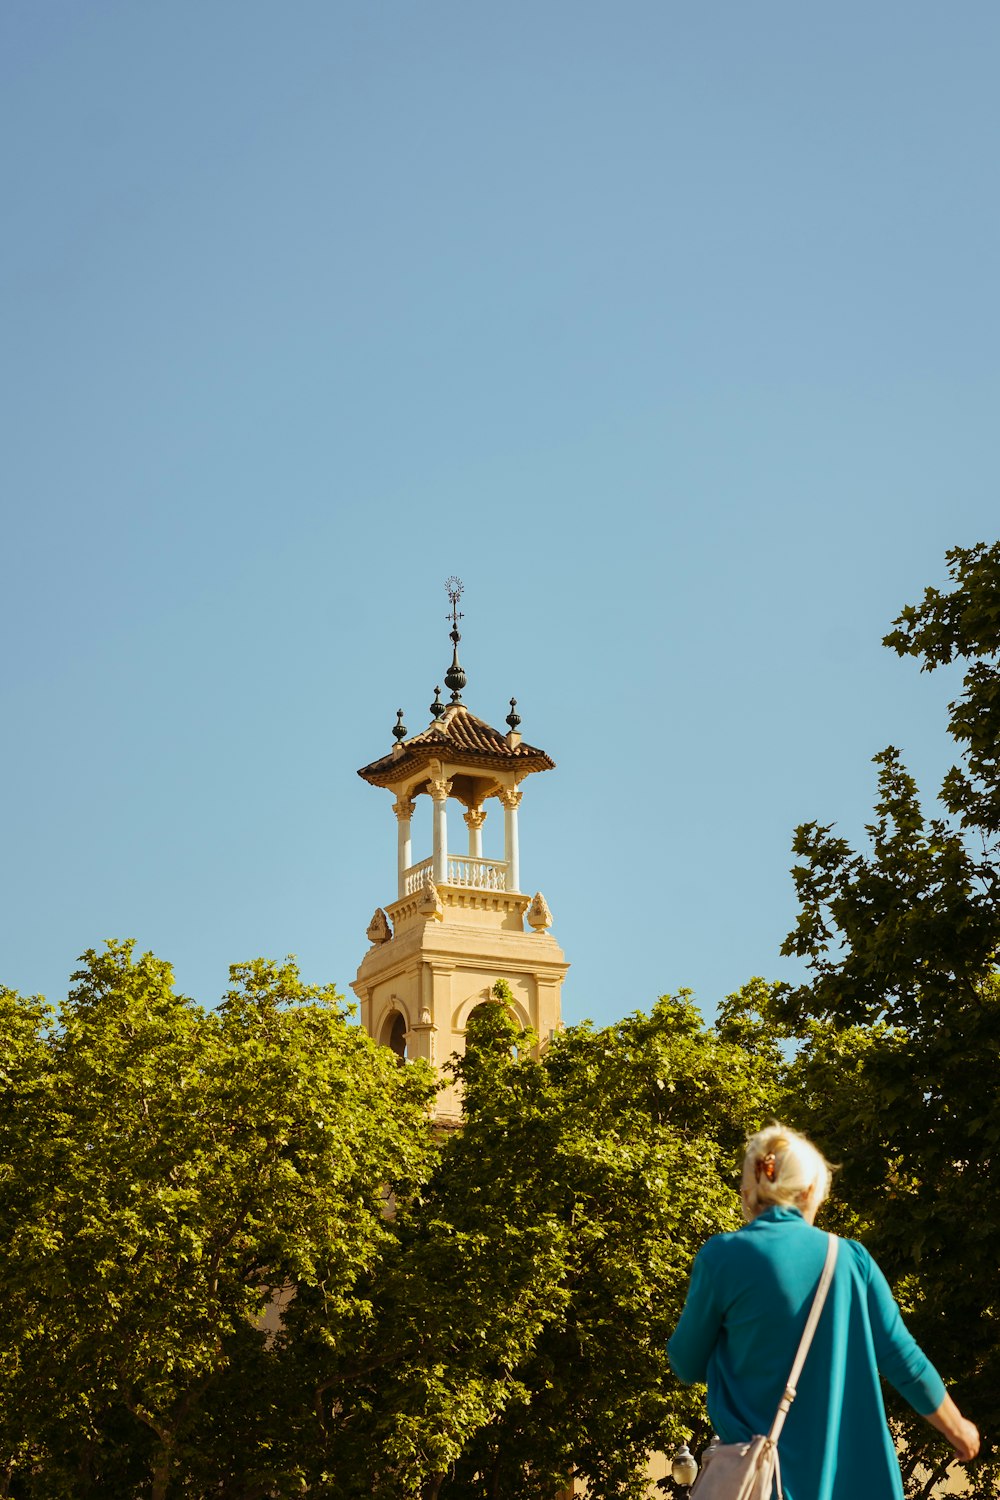 a woman in a blue top is walking towards a clock tower